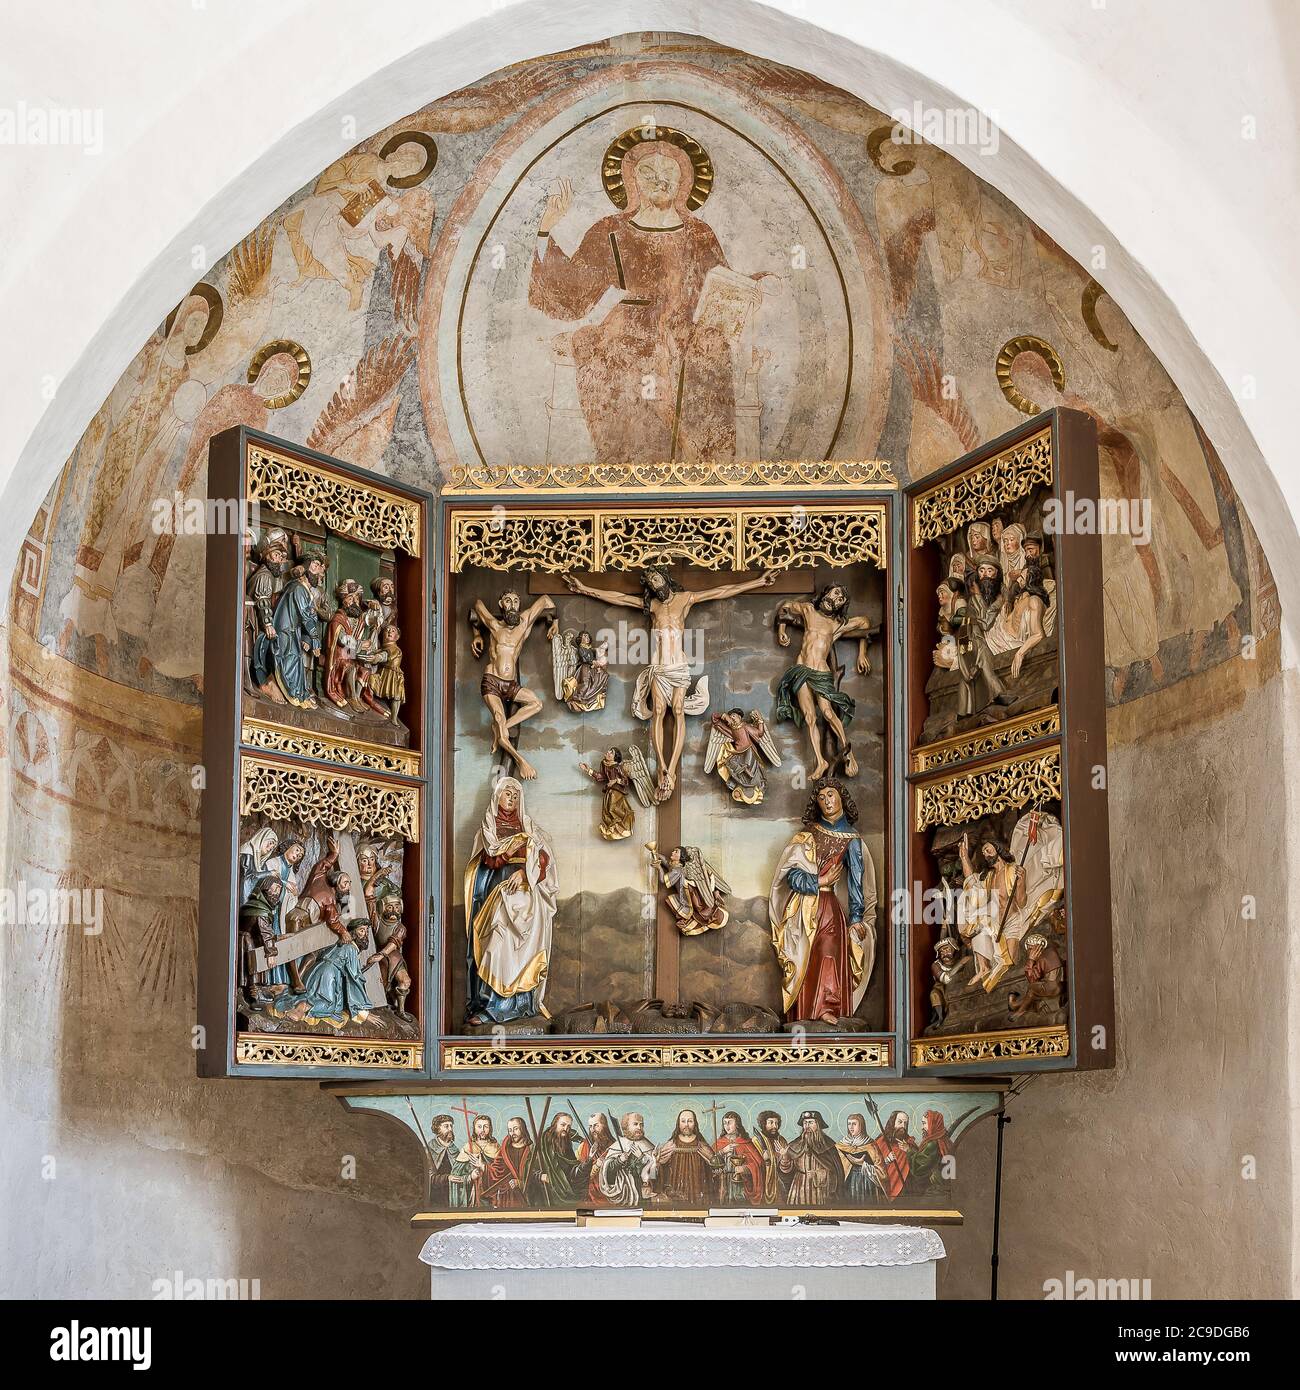 Triptych from the16th century of the crucifixion and Romanesque murals, Hagested, Denmark, July 16, 2020 Stock Photo